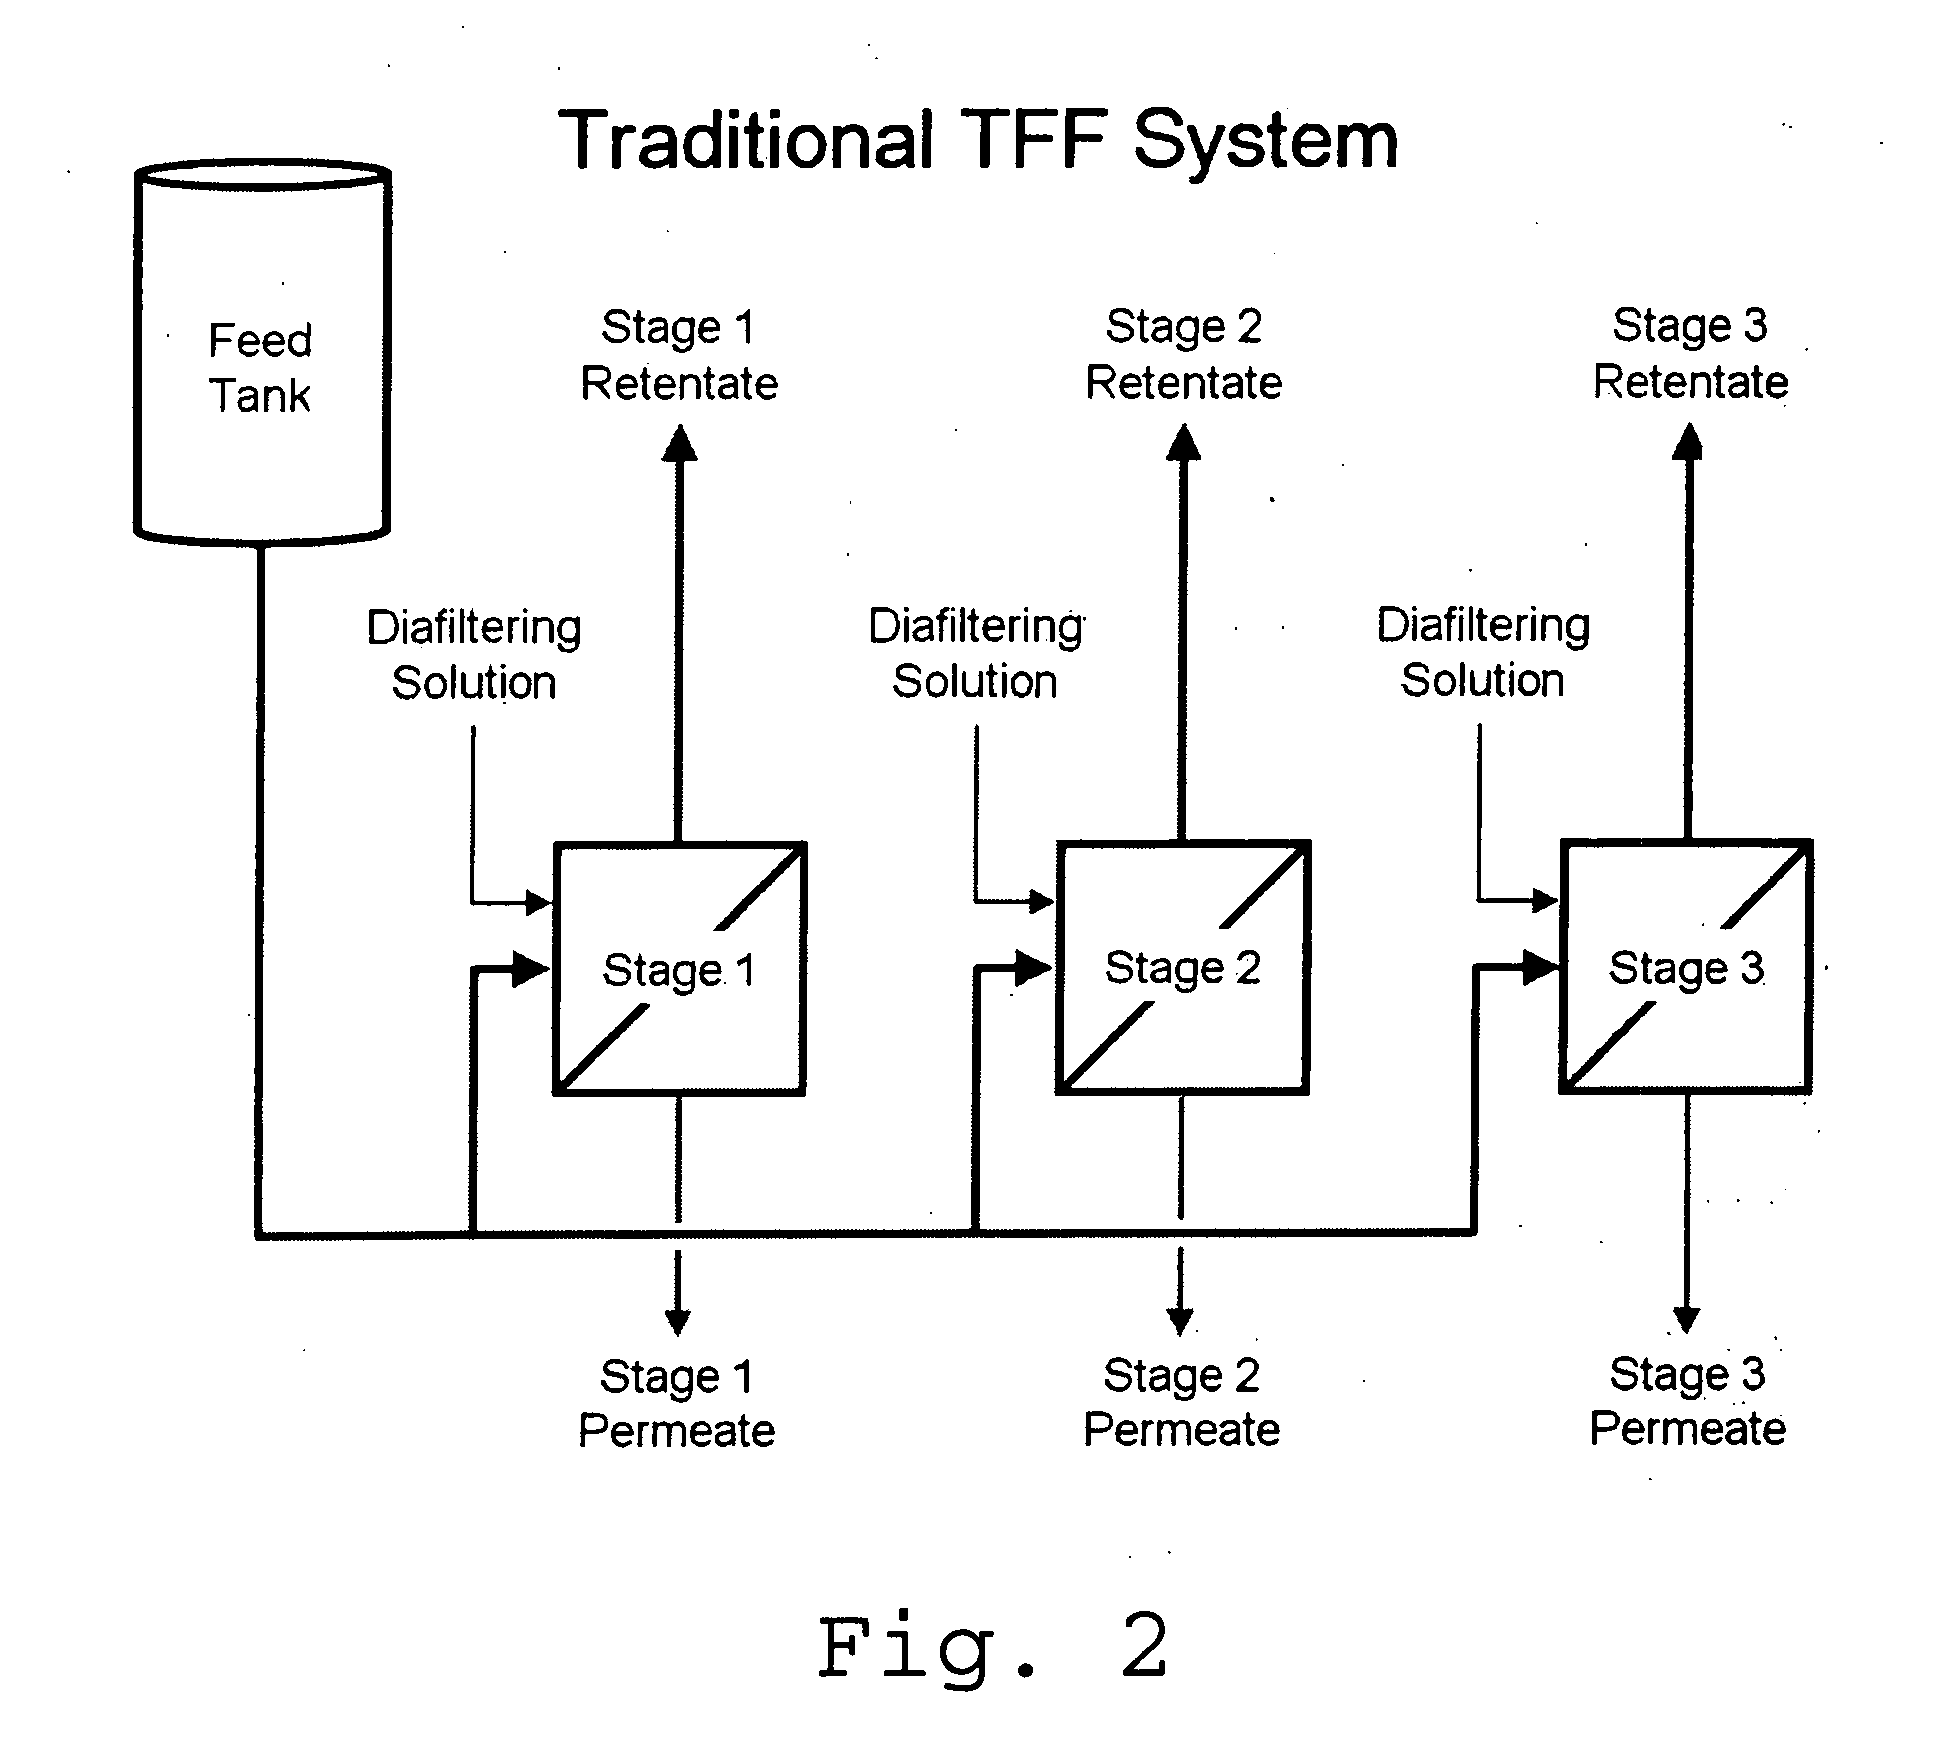 Tangential flow filtration apparatuses, systems, and processes for the separation of compounds